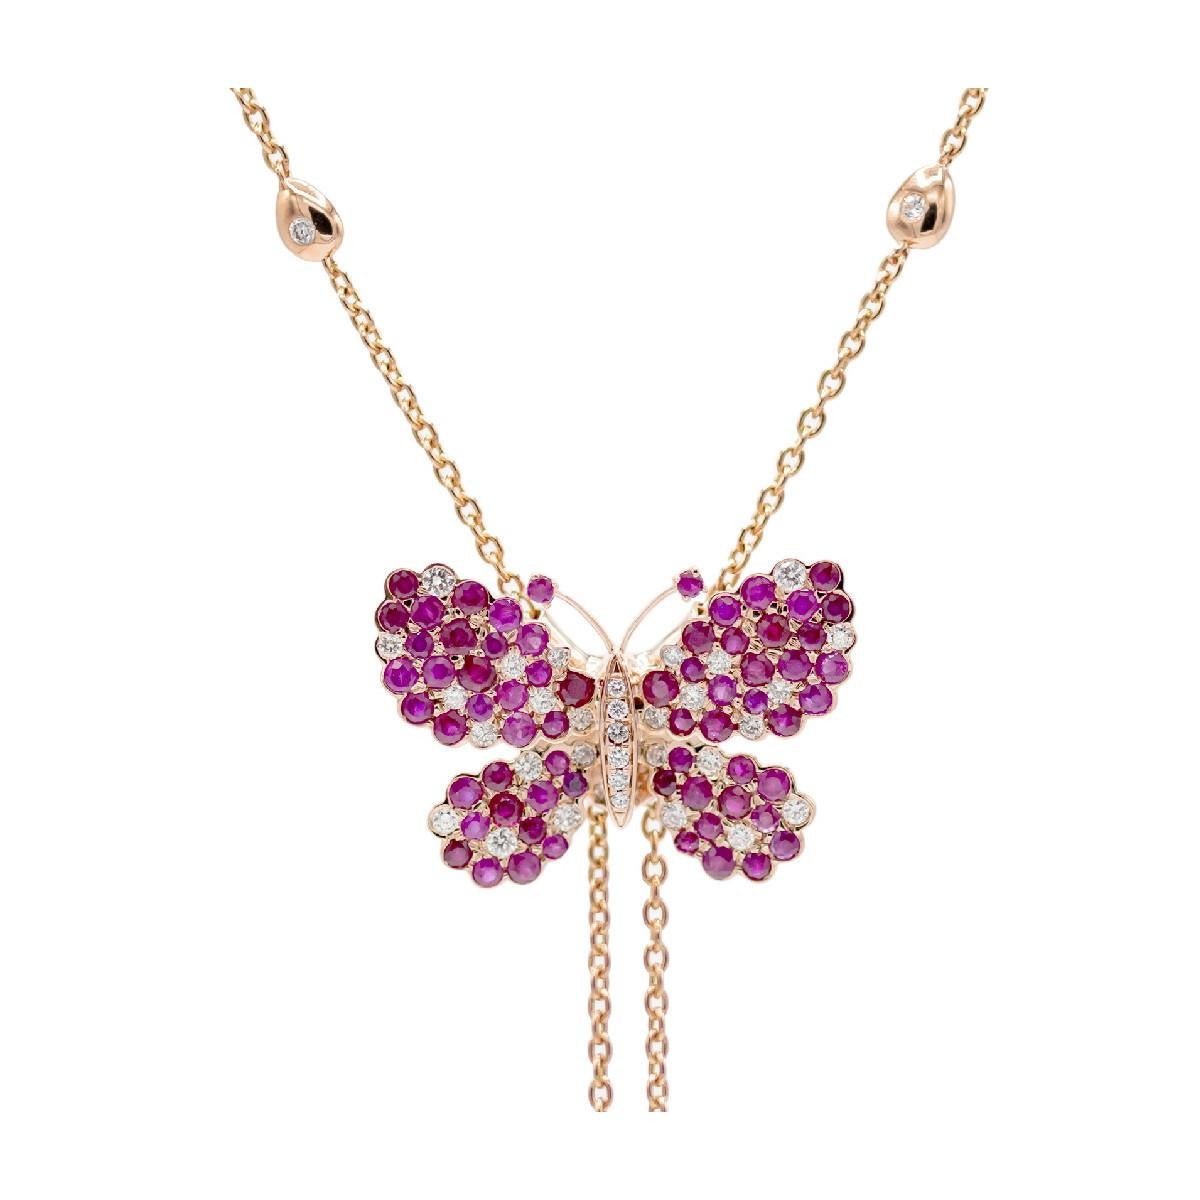 Diamonds, Ruby & 18K Gold Butterfly Necklace
Butterfly Collection... everyday wearable botanical pieces 
Irama Pradera is a dynamic and outgoing designer from Spain that searches always for the best gems and combines classic with contemporary